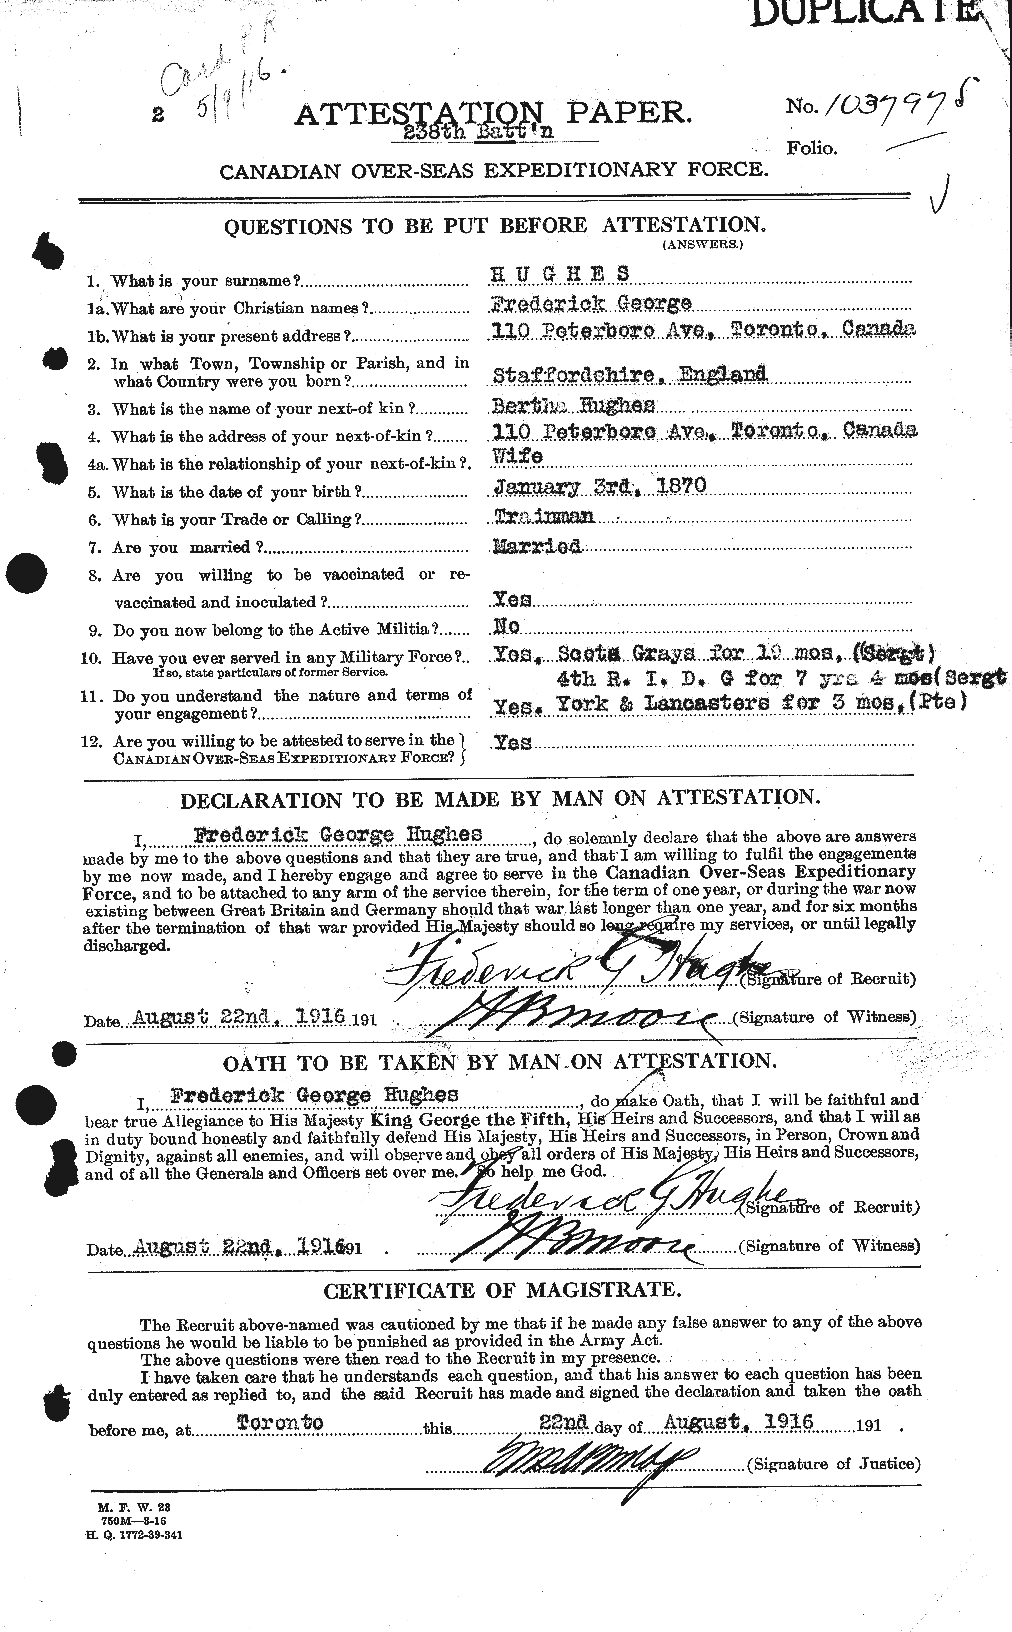 Personnel Records of the First World War - CEF 403798a